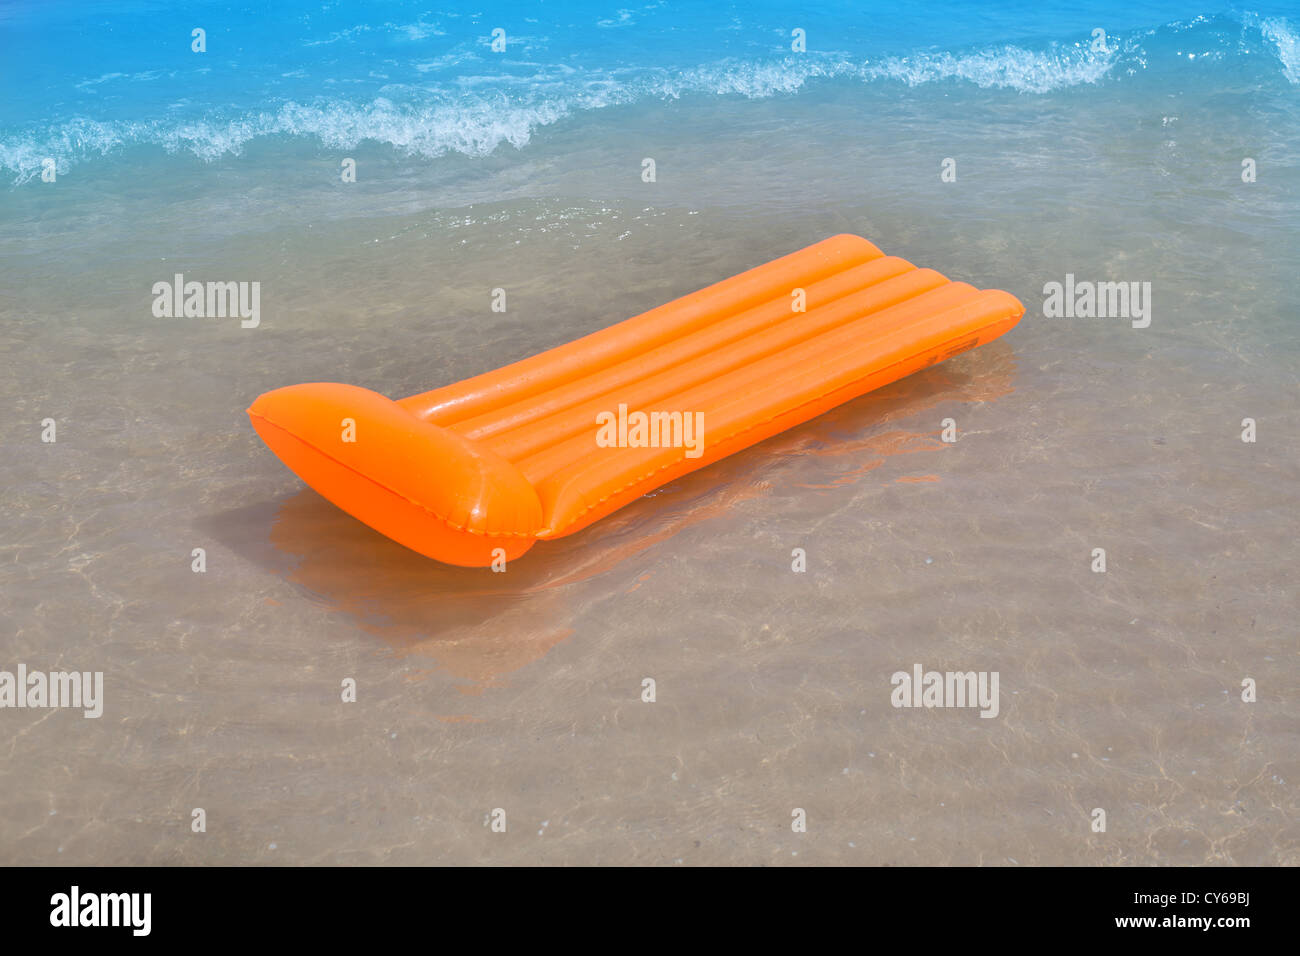 Beach shore with orange floating lounge and waves over sand bottom Stock Photo